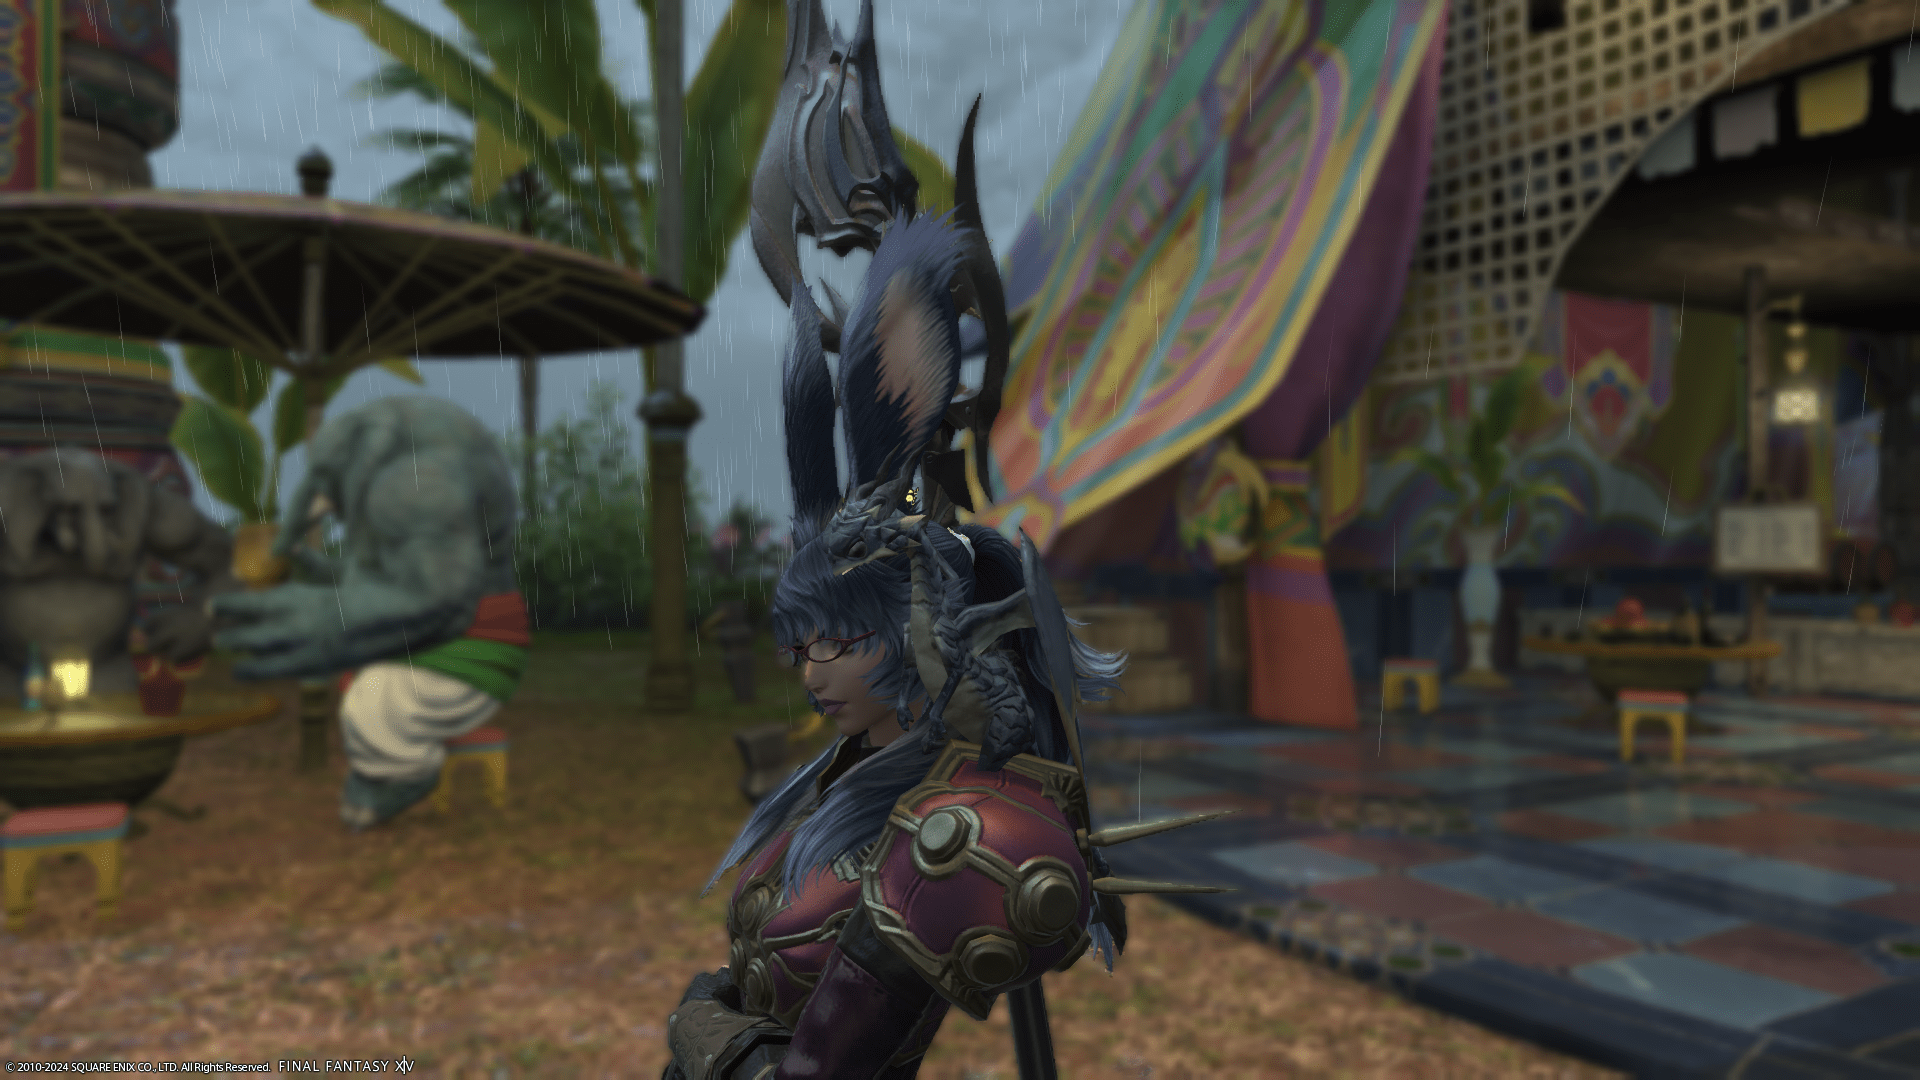 Me with my Dragonet minion perched on my shoulder while standing in the rain.